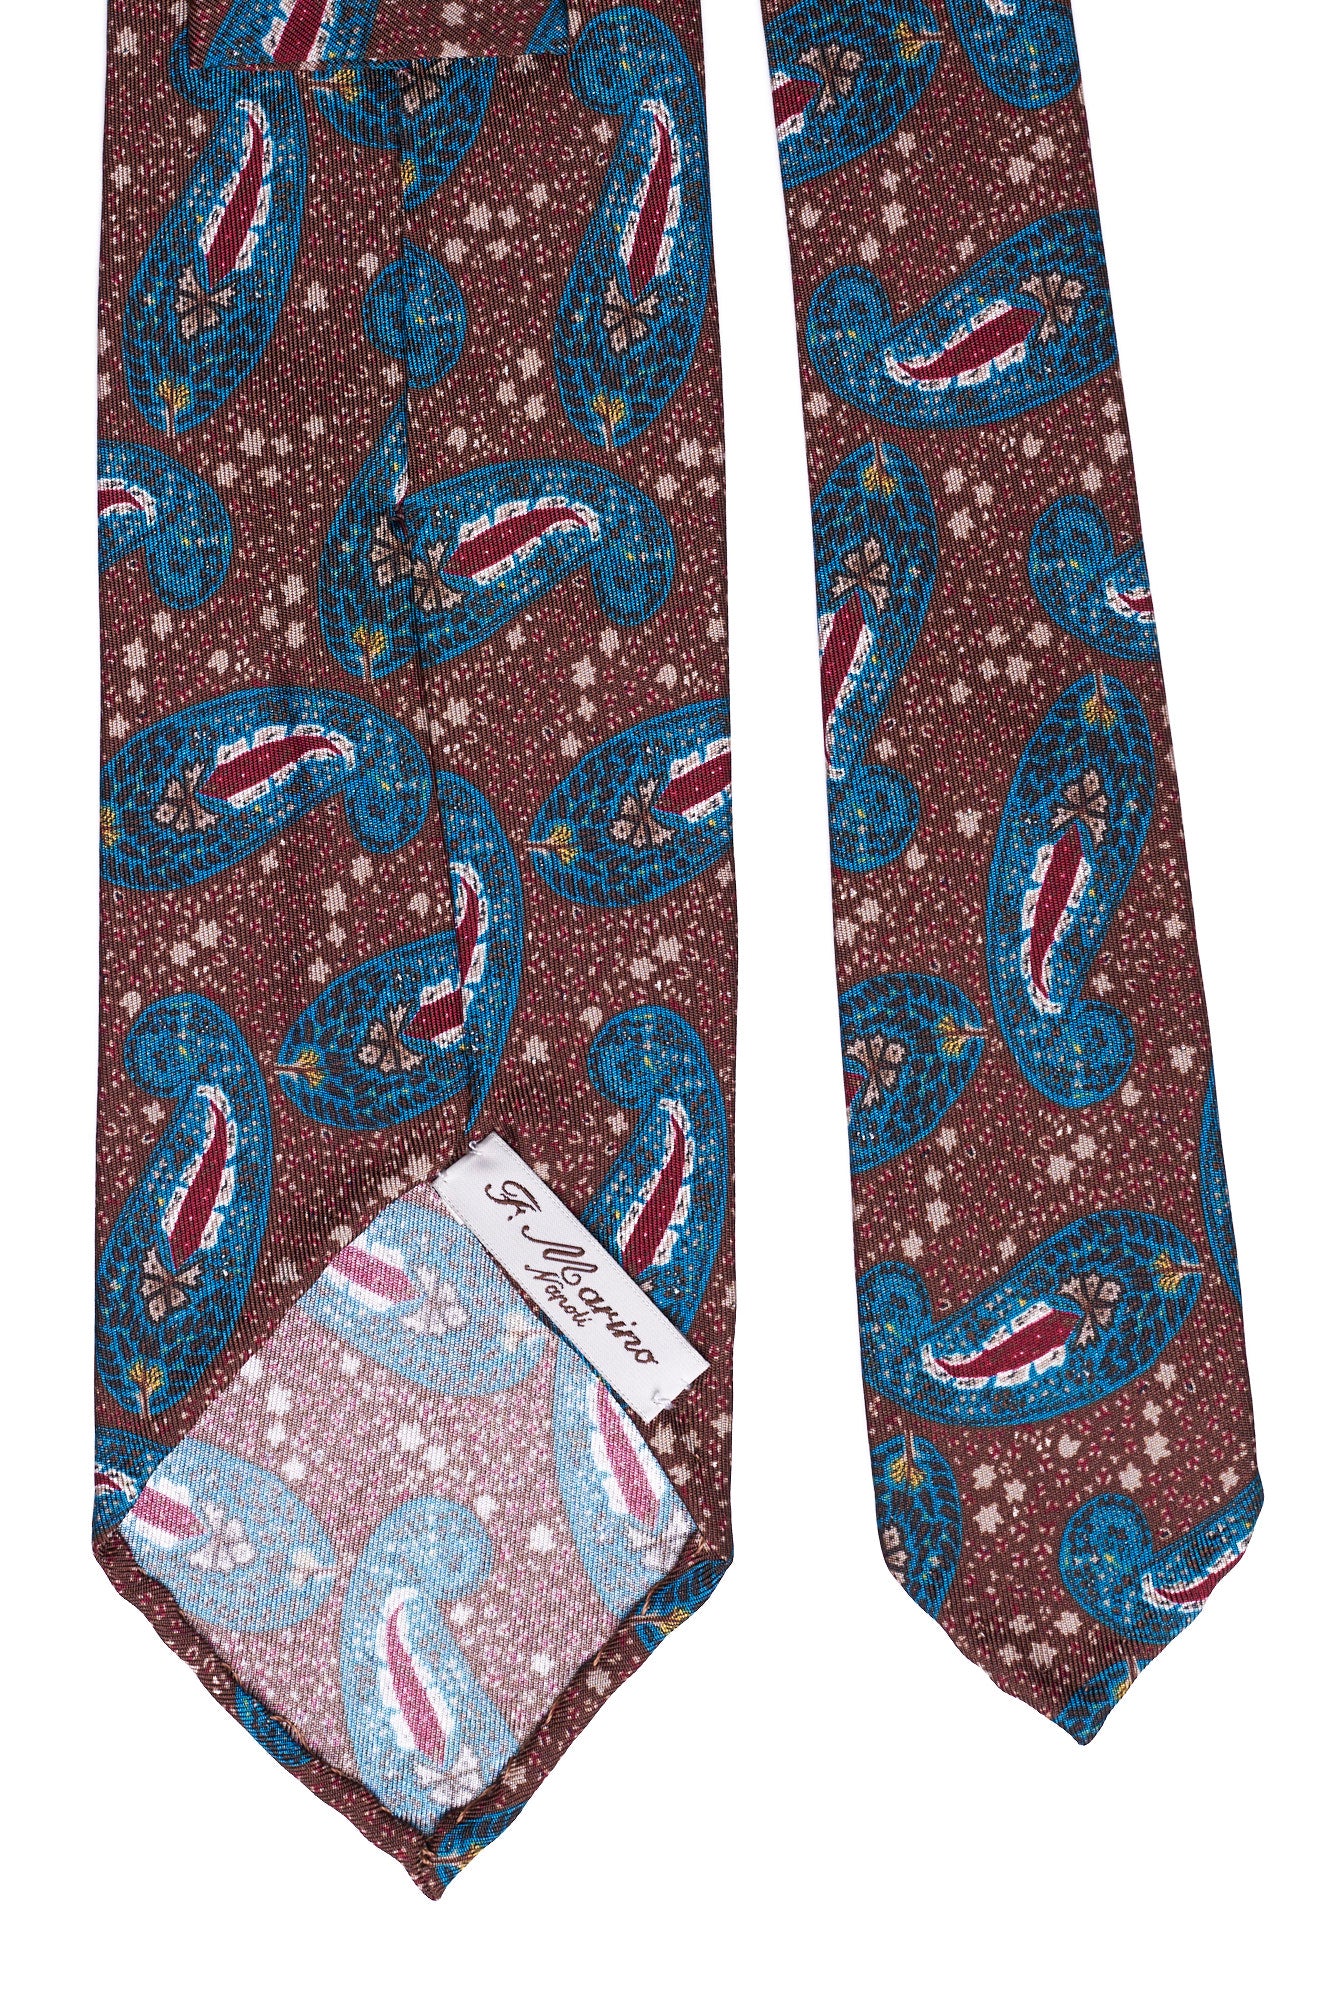 Ready To Wear Tie - 3 Fold Handrolled - Brown - Paisley